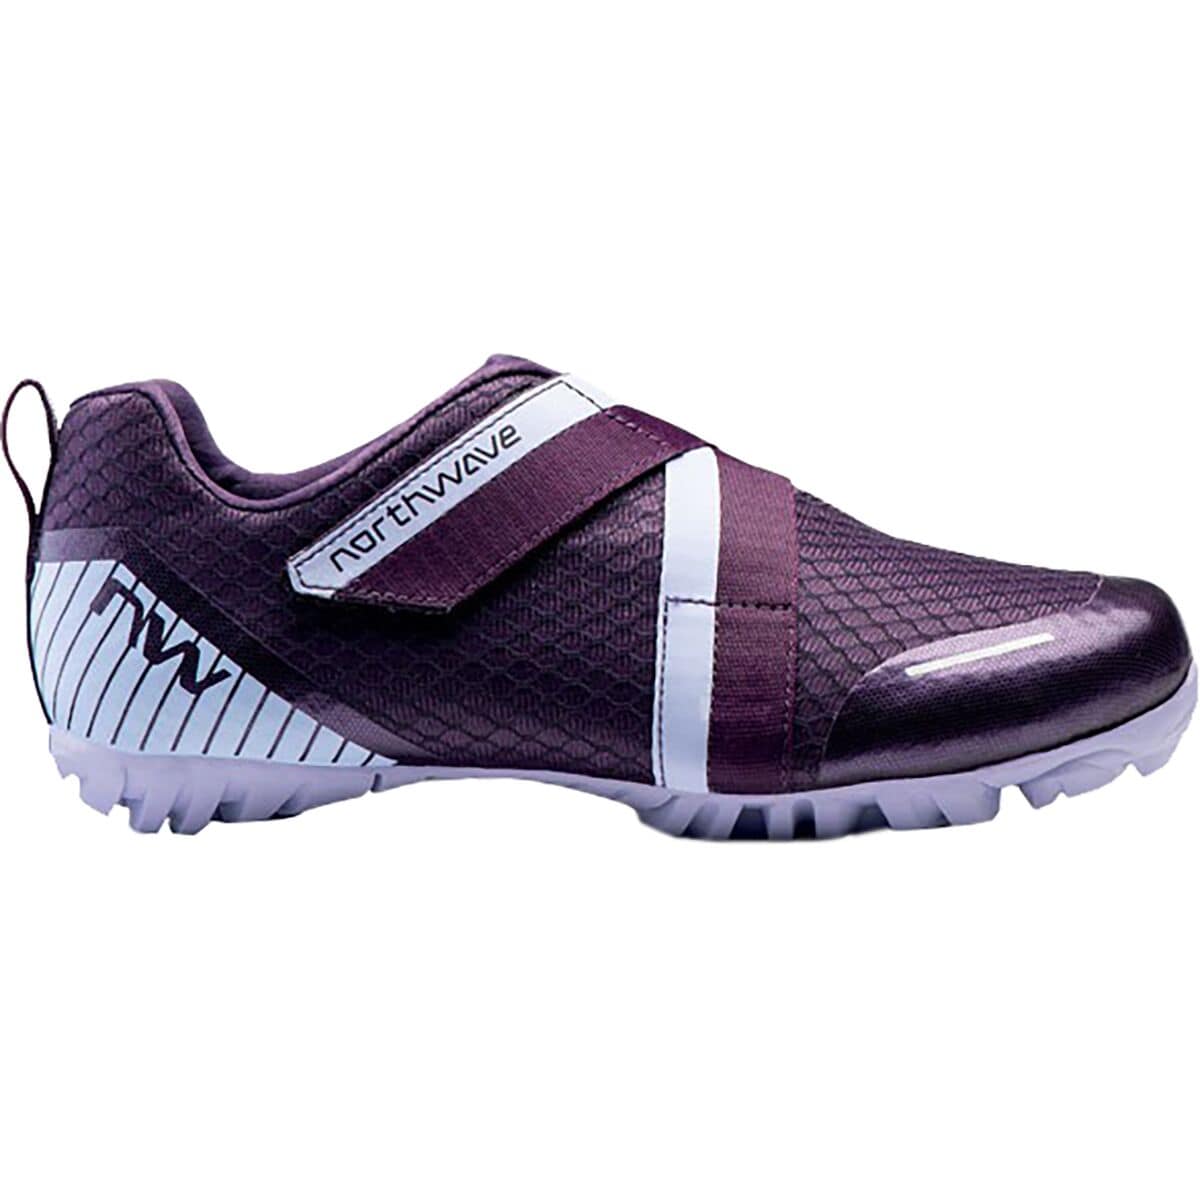 Northwave Active Cycling Shoe - Women's